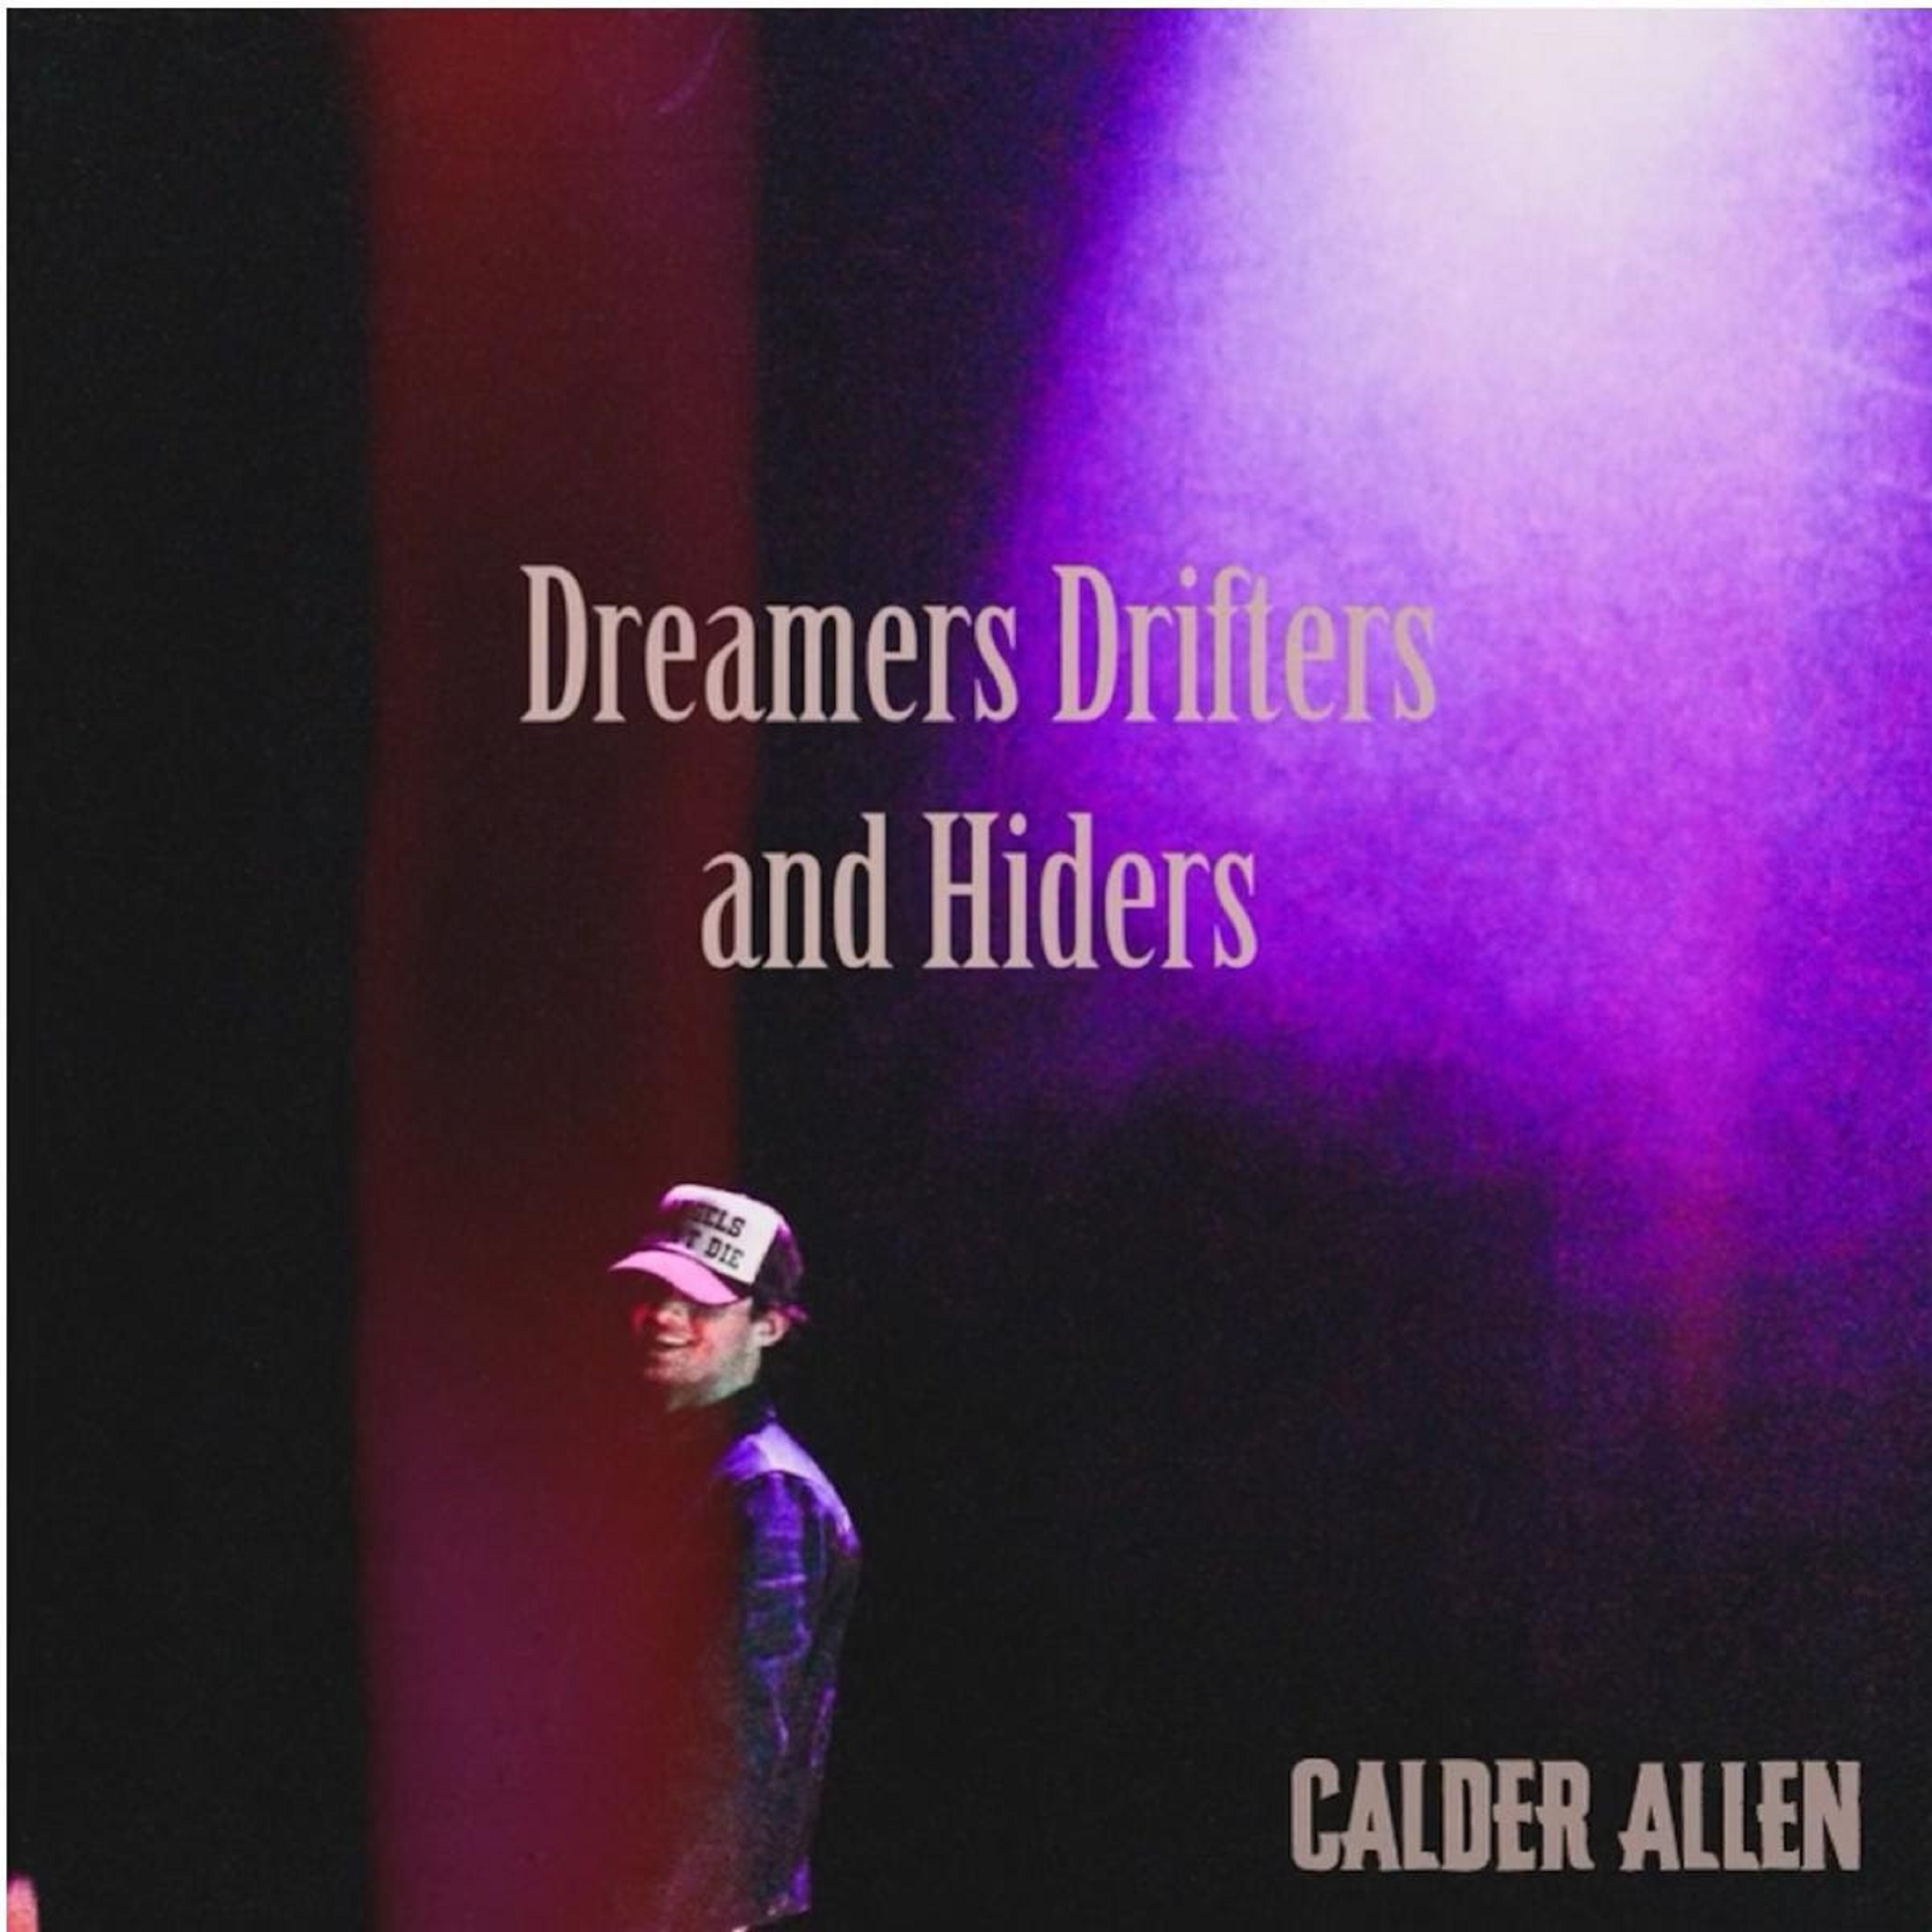 Calder Allen’s Sophomore Release Dreamers Drifters and Hiders Is Out Now